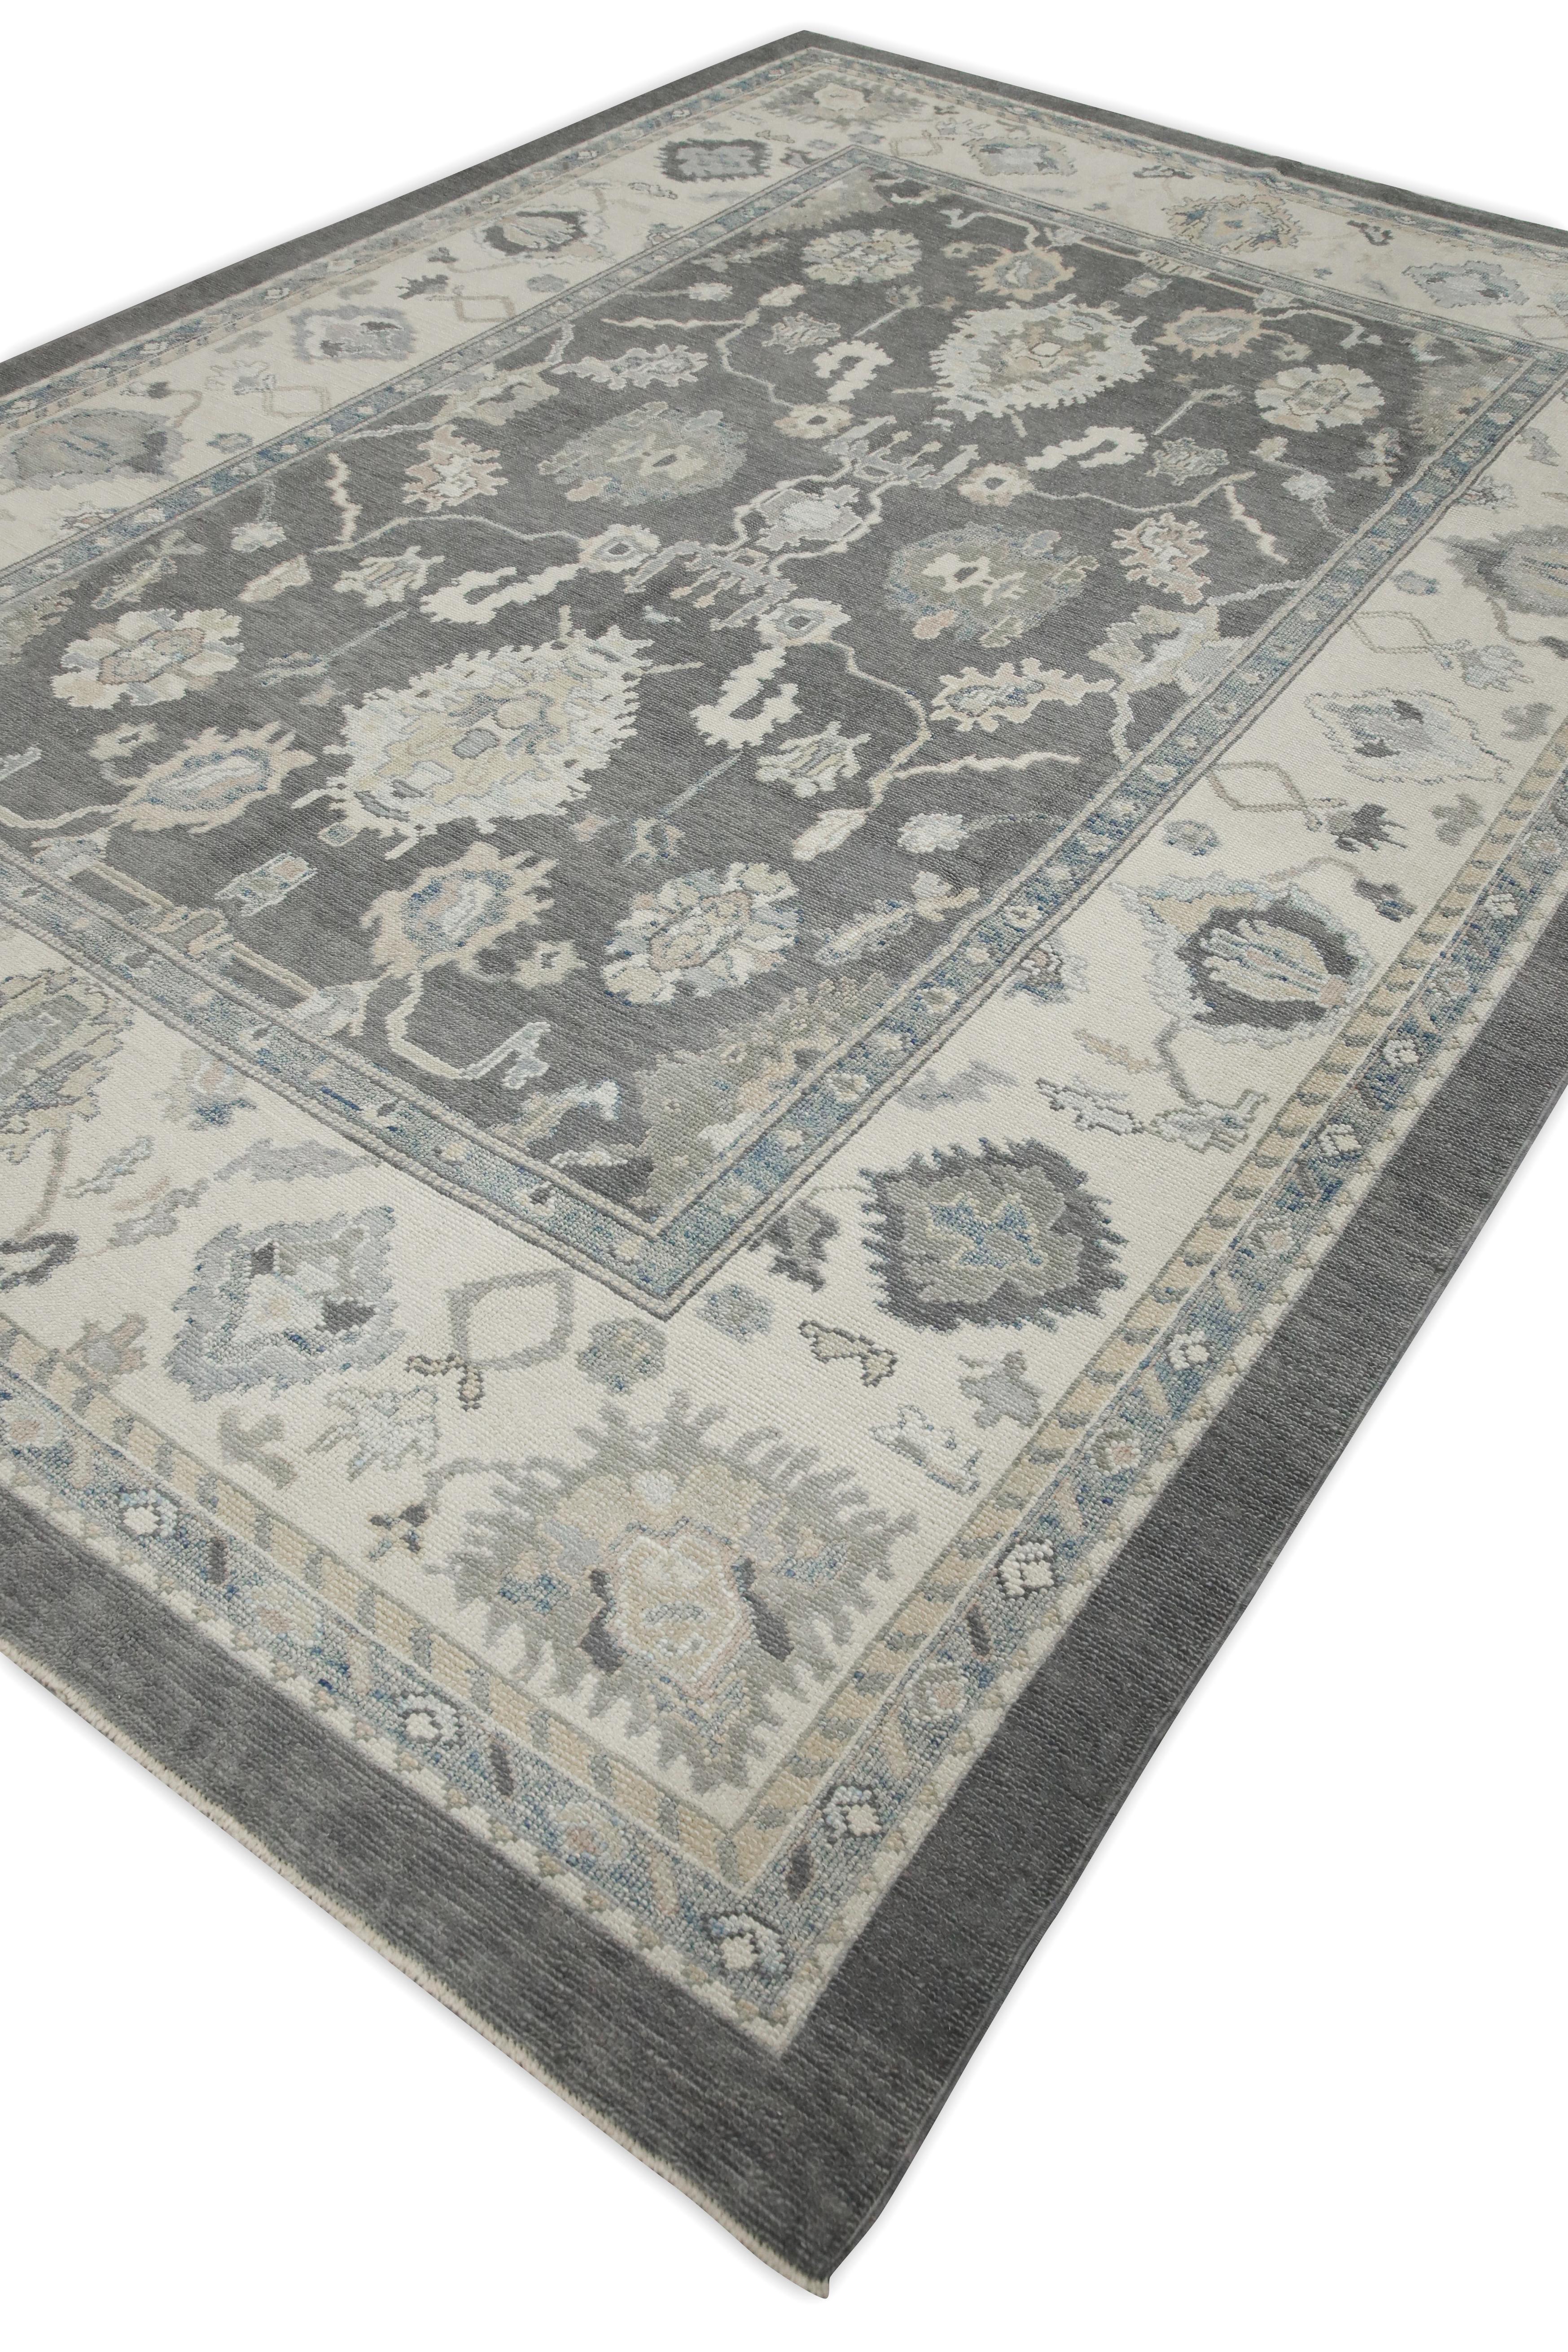 Contemporary Gray Floral Design Handwoven Wool Turkish Oushak Rug 8'9